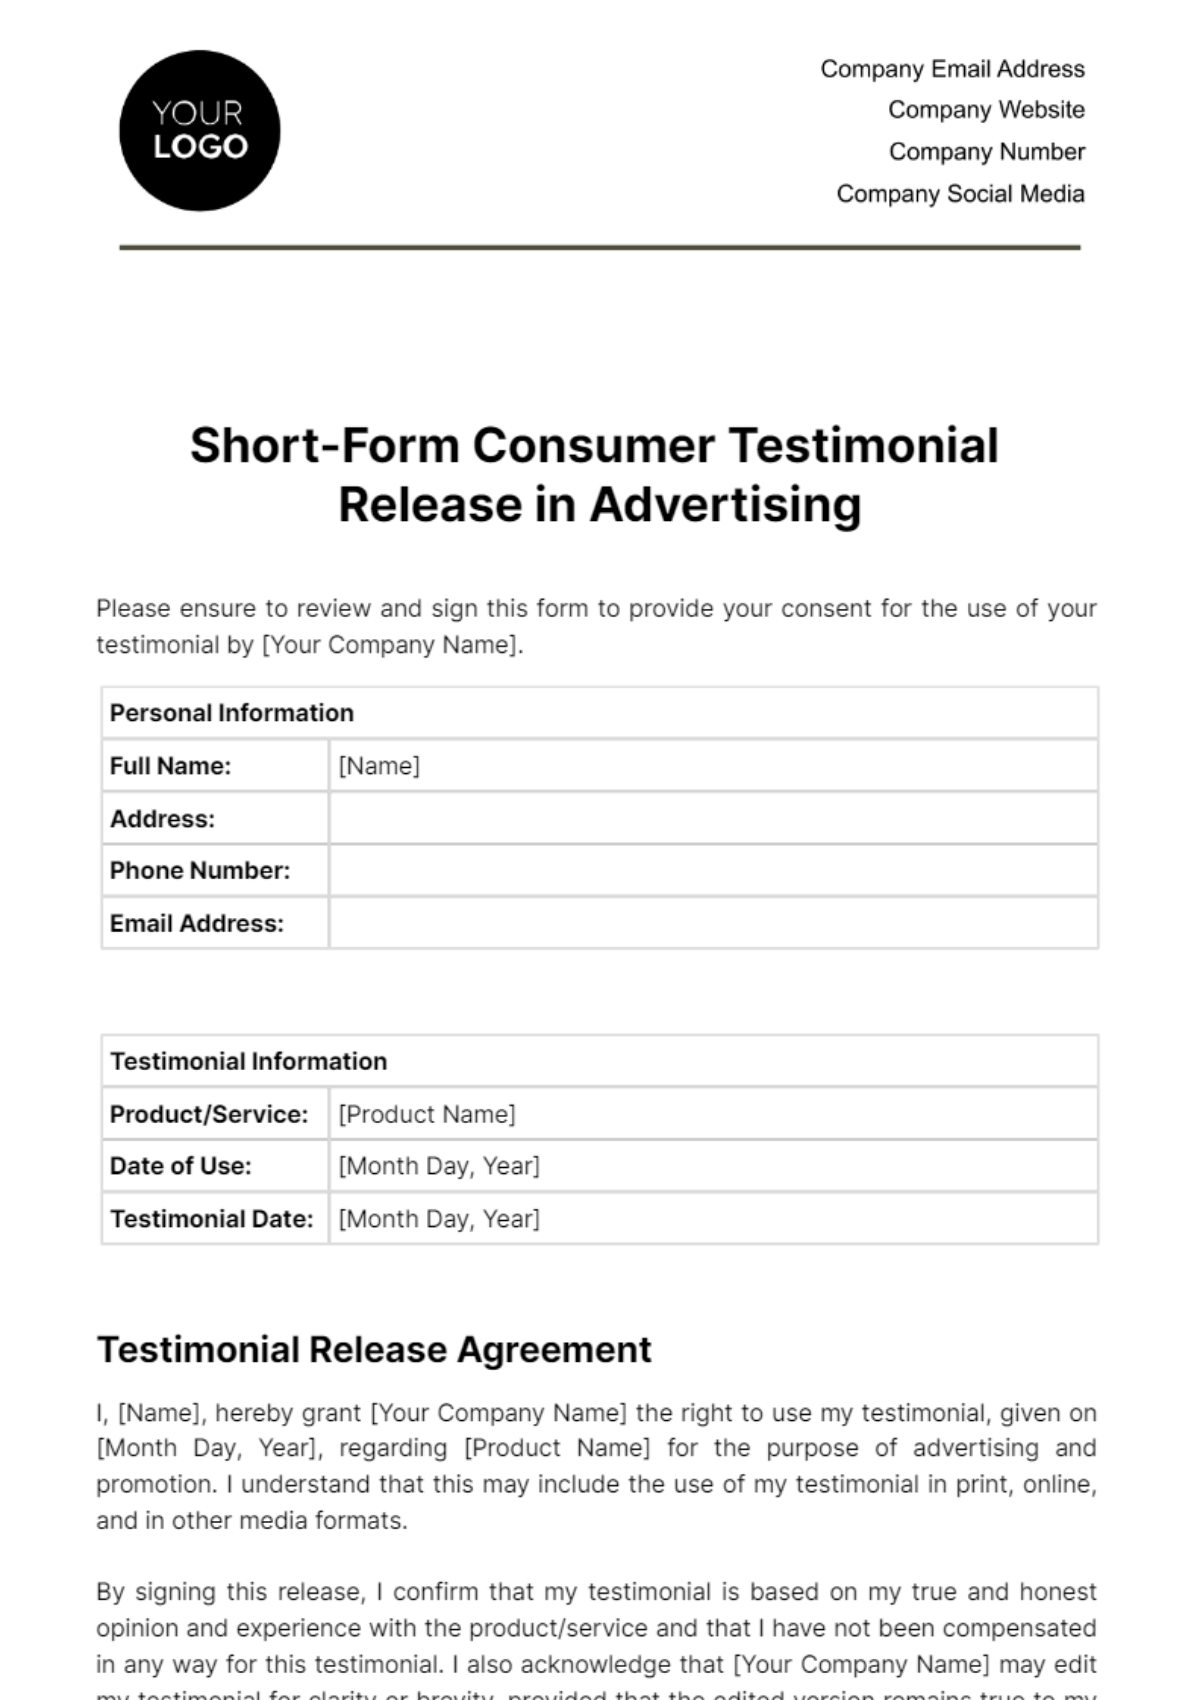 Free Short-Form Consumer Testimonial Release in Advertising Template